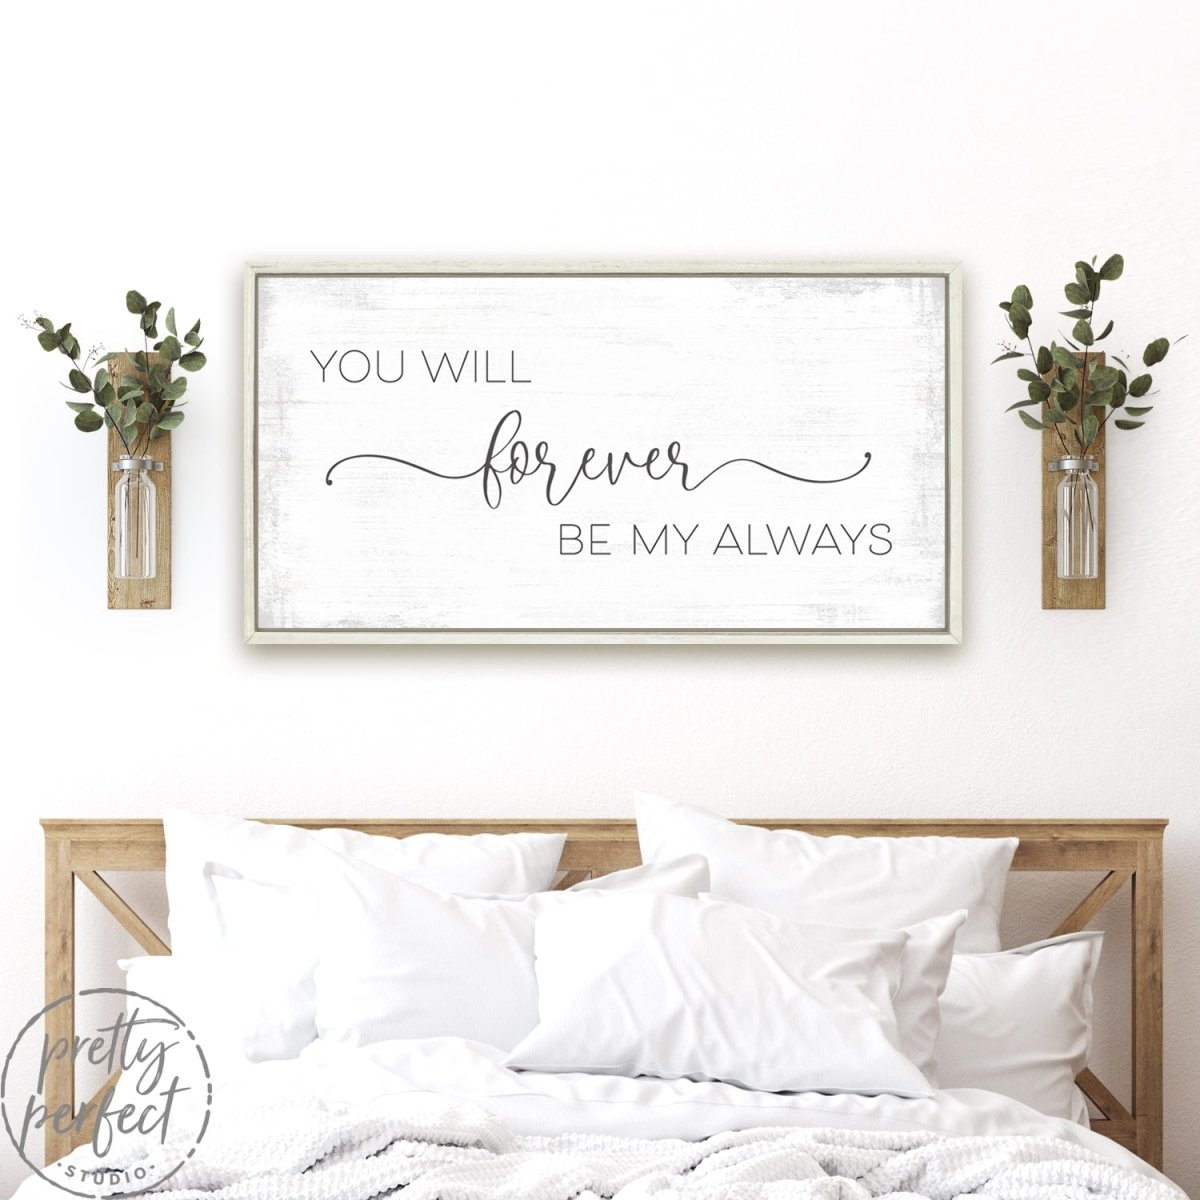 You Will Forever Be My Always Sign Over The Bed in Master Bedroom - Pretty Perfect Studio